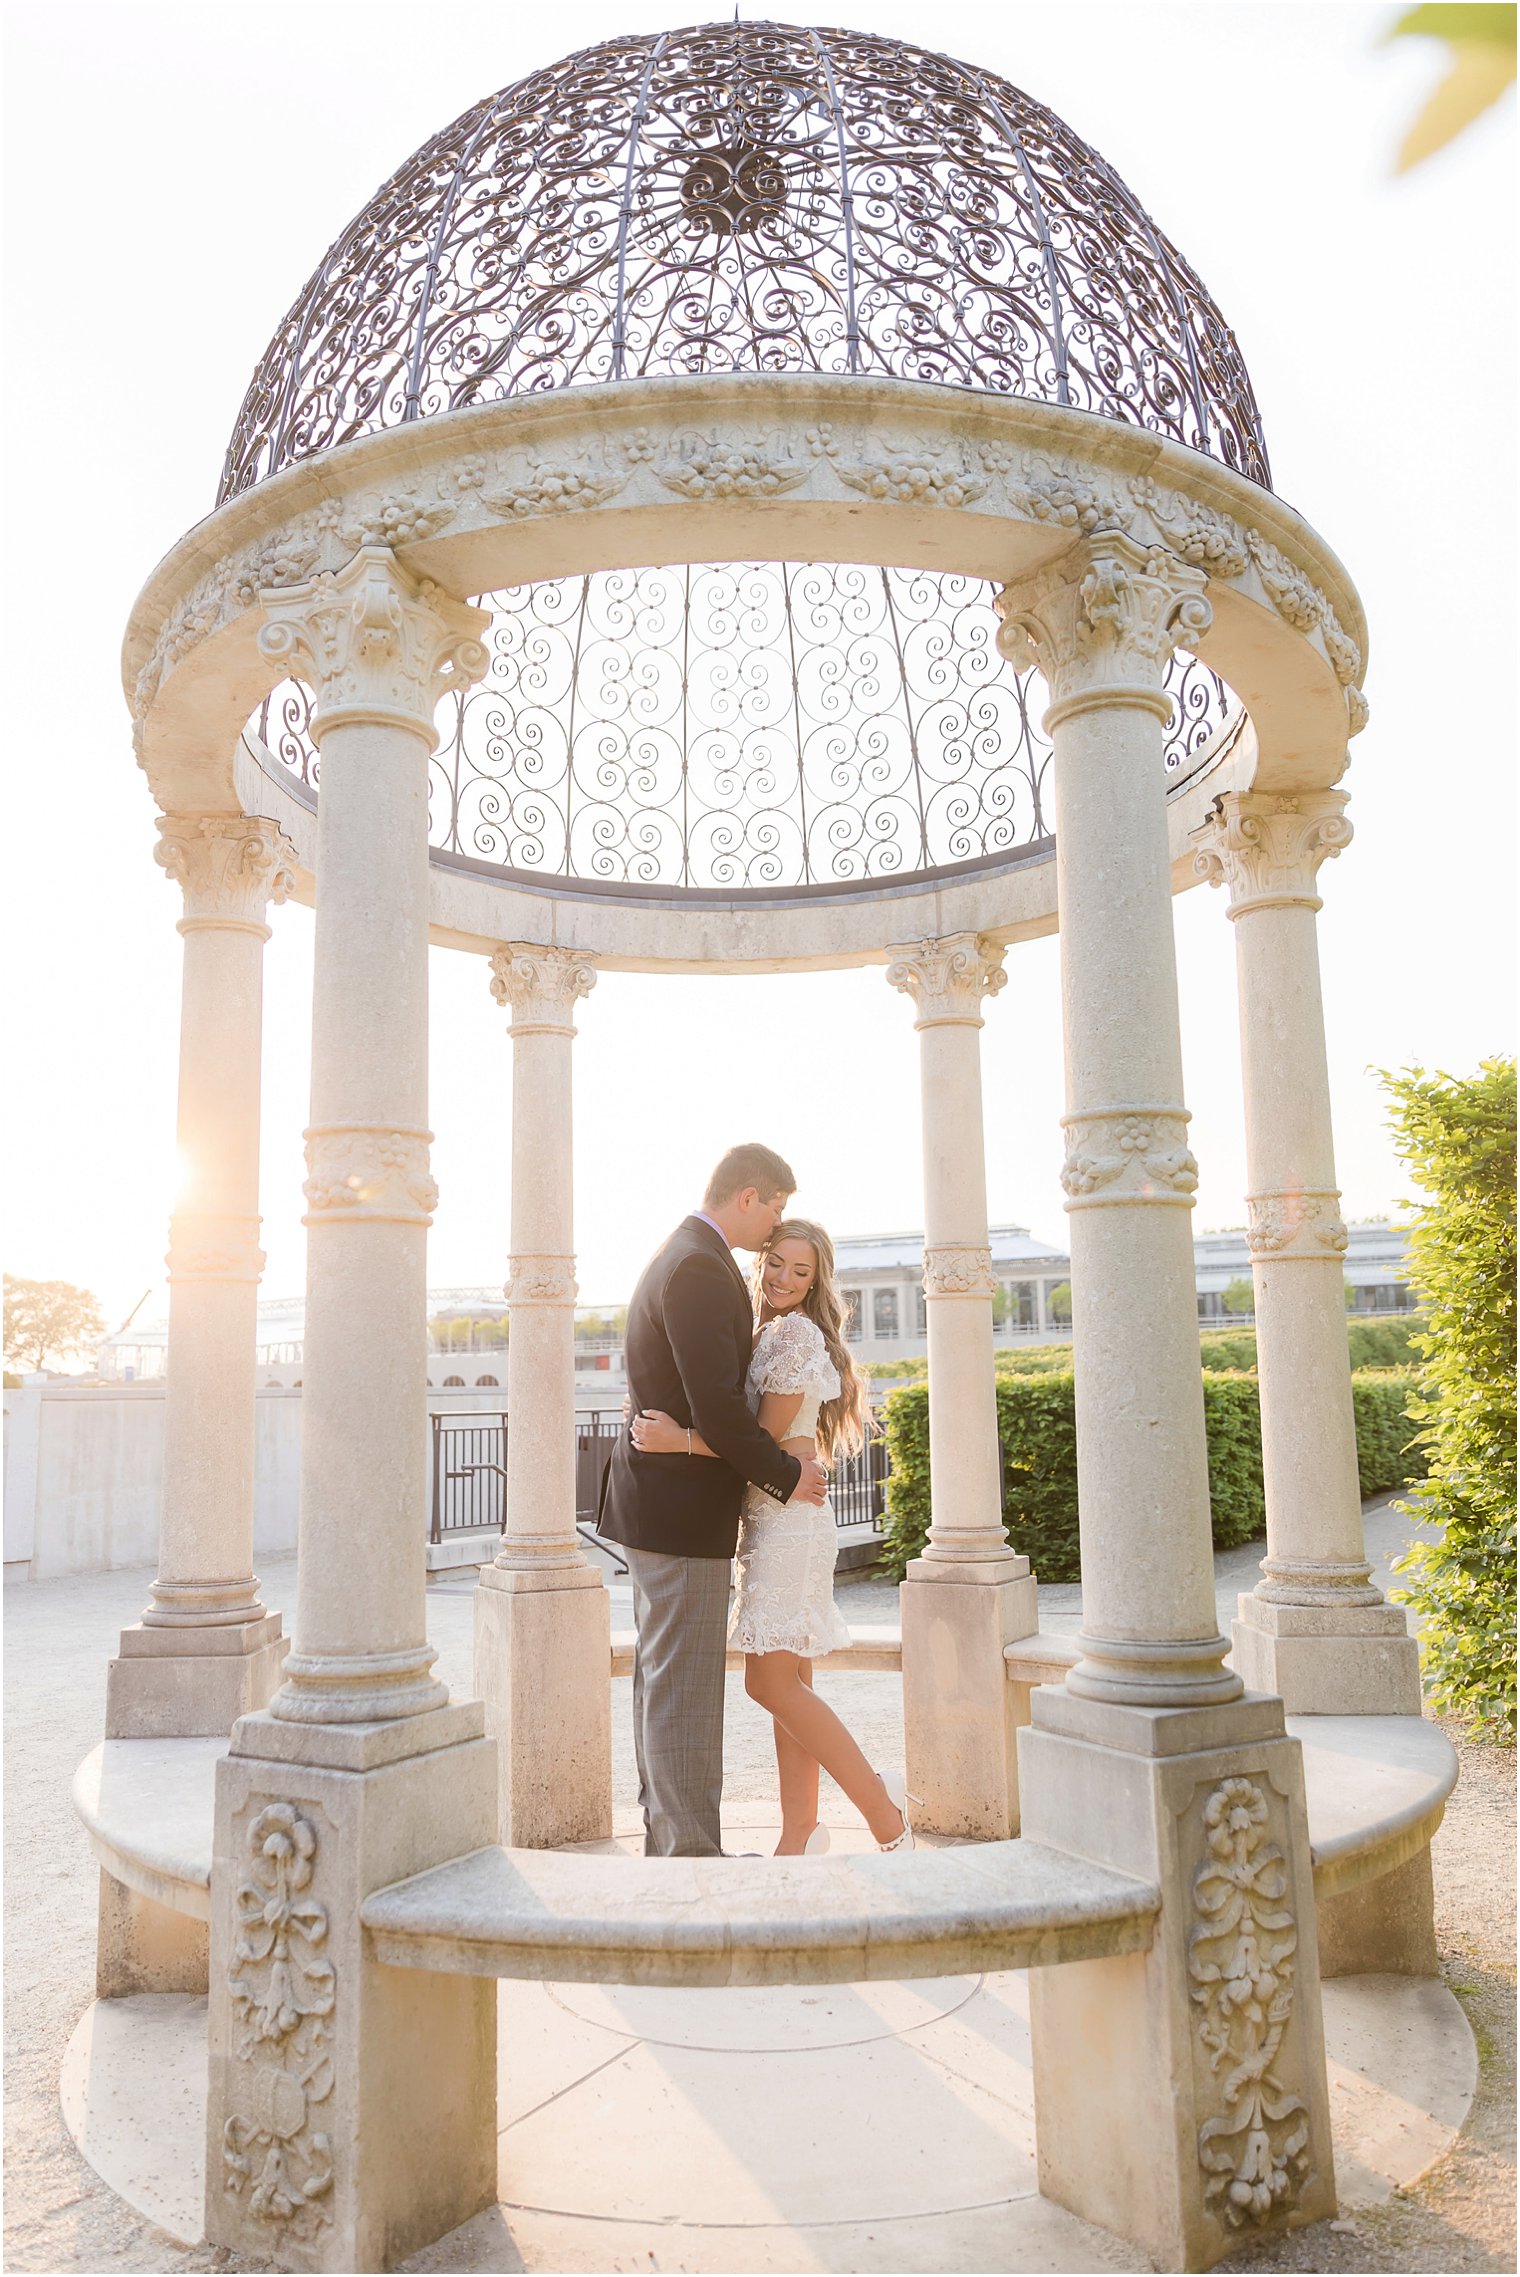 engaged couple hugs in gazebo with wrought iron top at Longwood Gardens